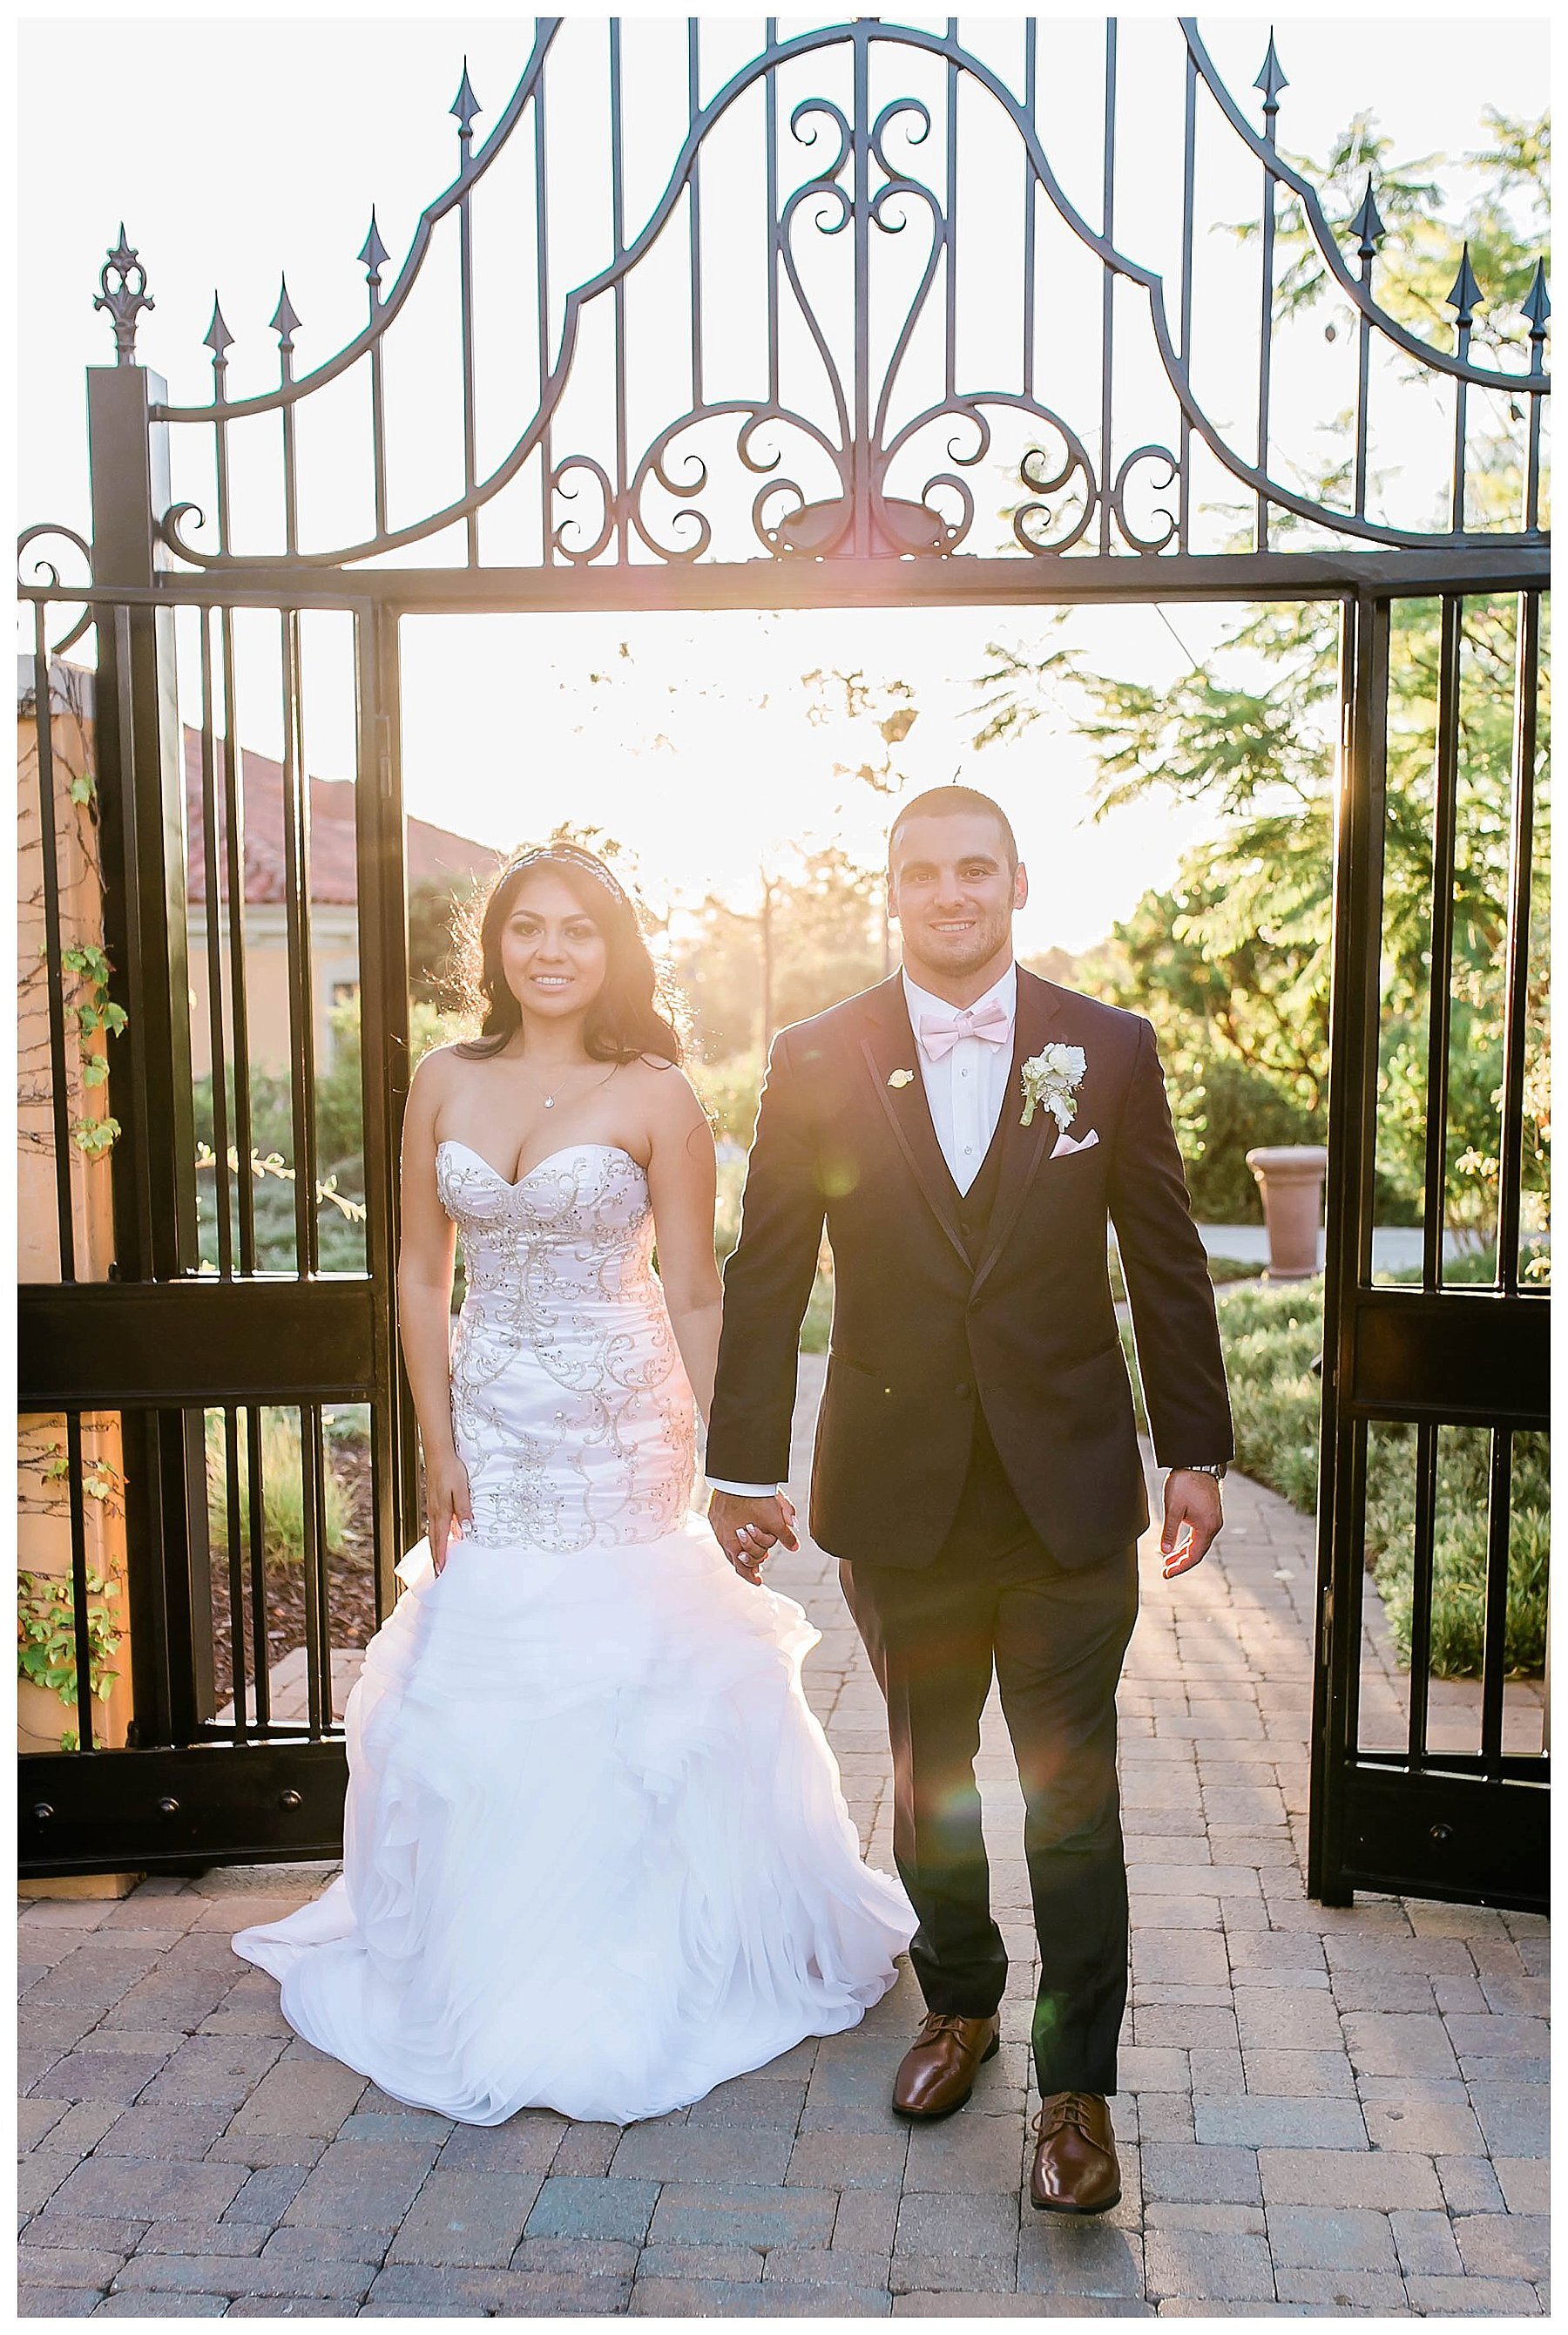  bride and groom in the doorway of the venue entrance 